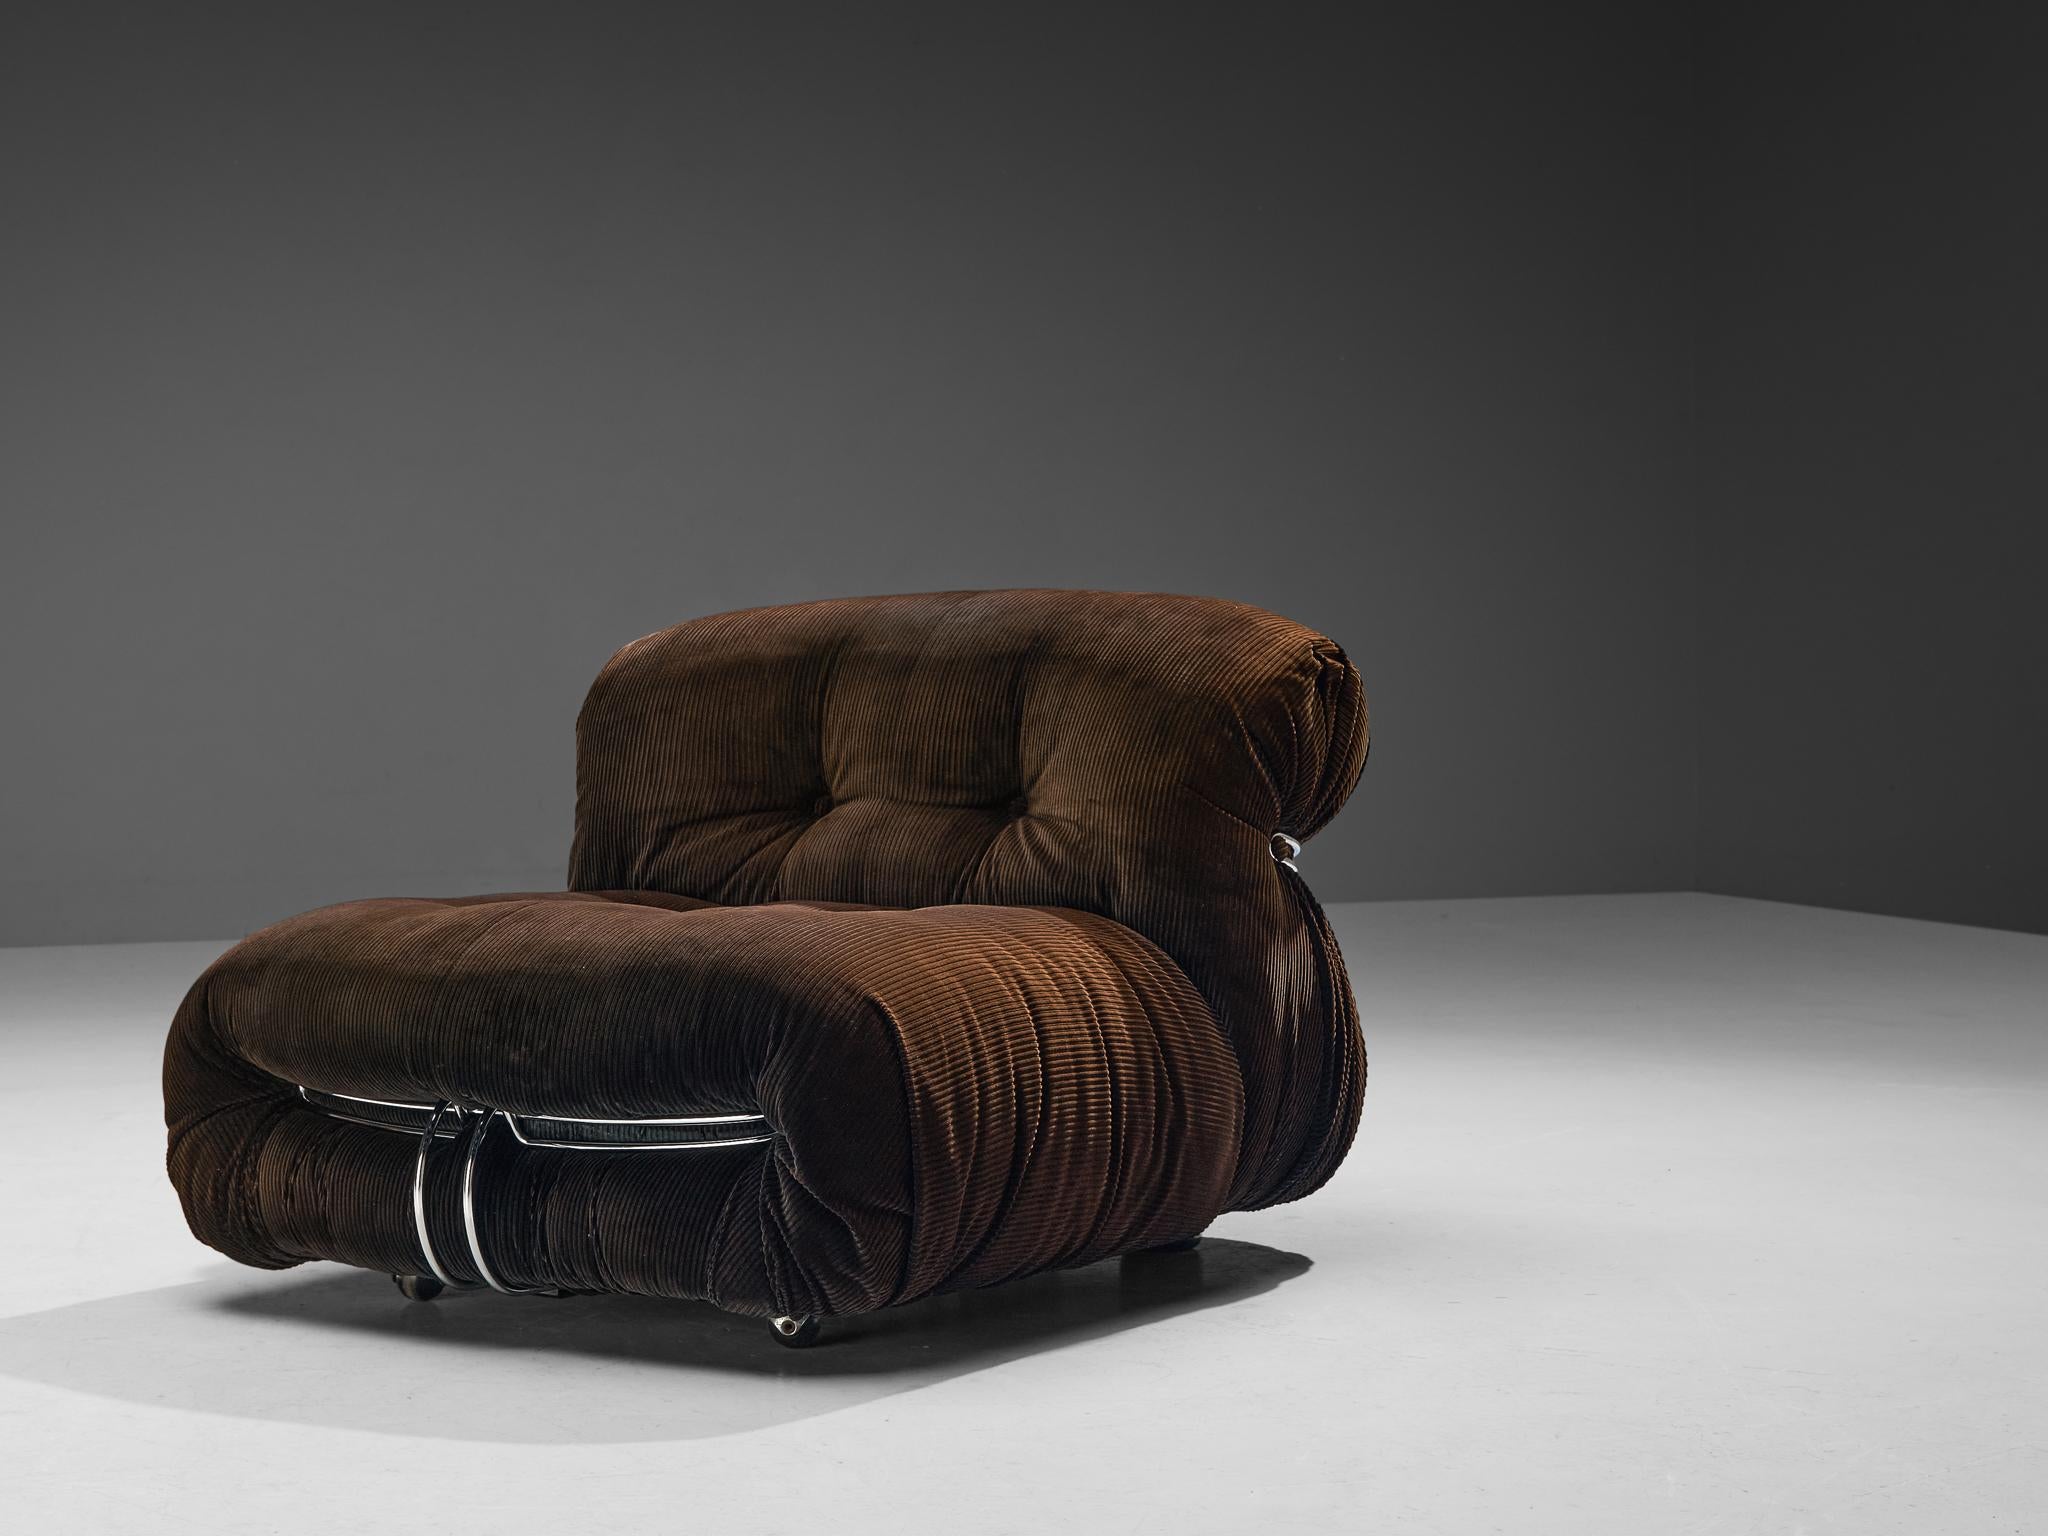 Afra & Tobia Scarpa for Cassina 'Soriana' Lounge Chair in Corduroy